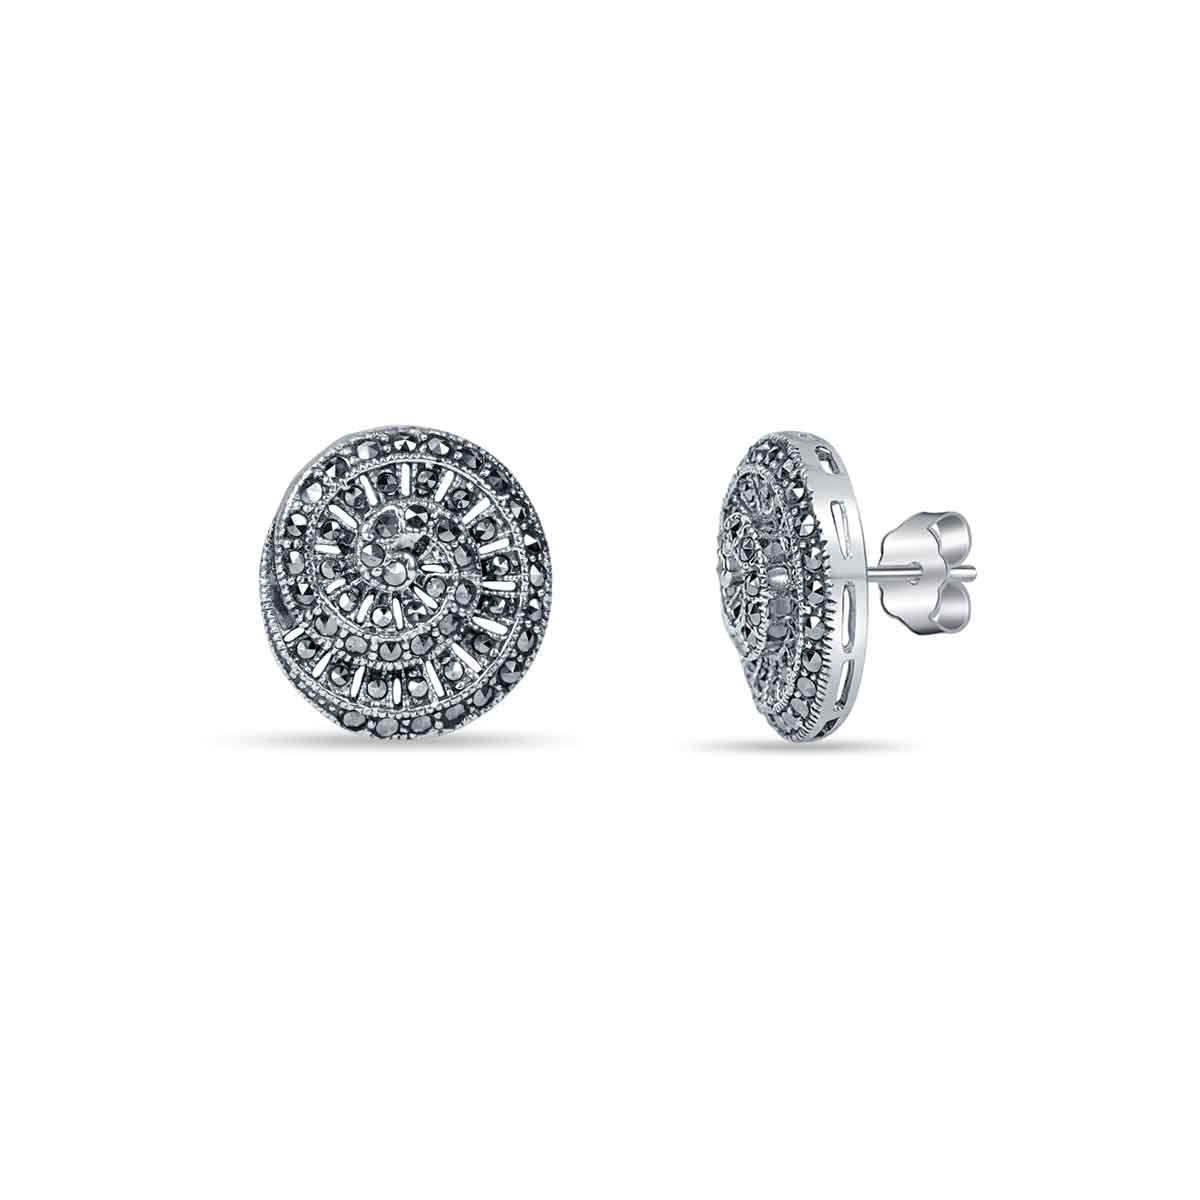 Pure Sterling silver studs earring for women in oxidised finish, Maracsite studded.  Features Spiral design this earring is perfect for everyday wear.